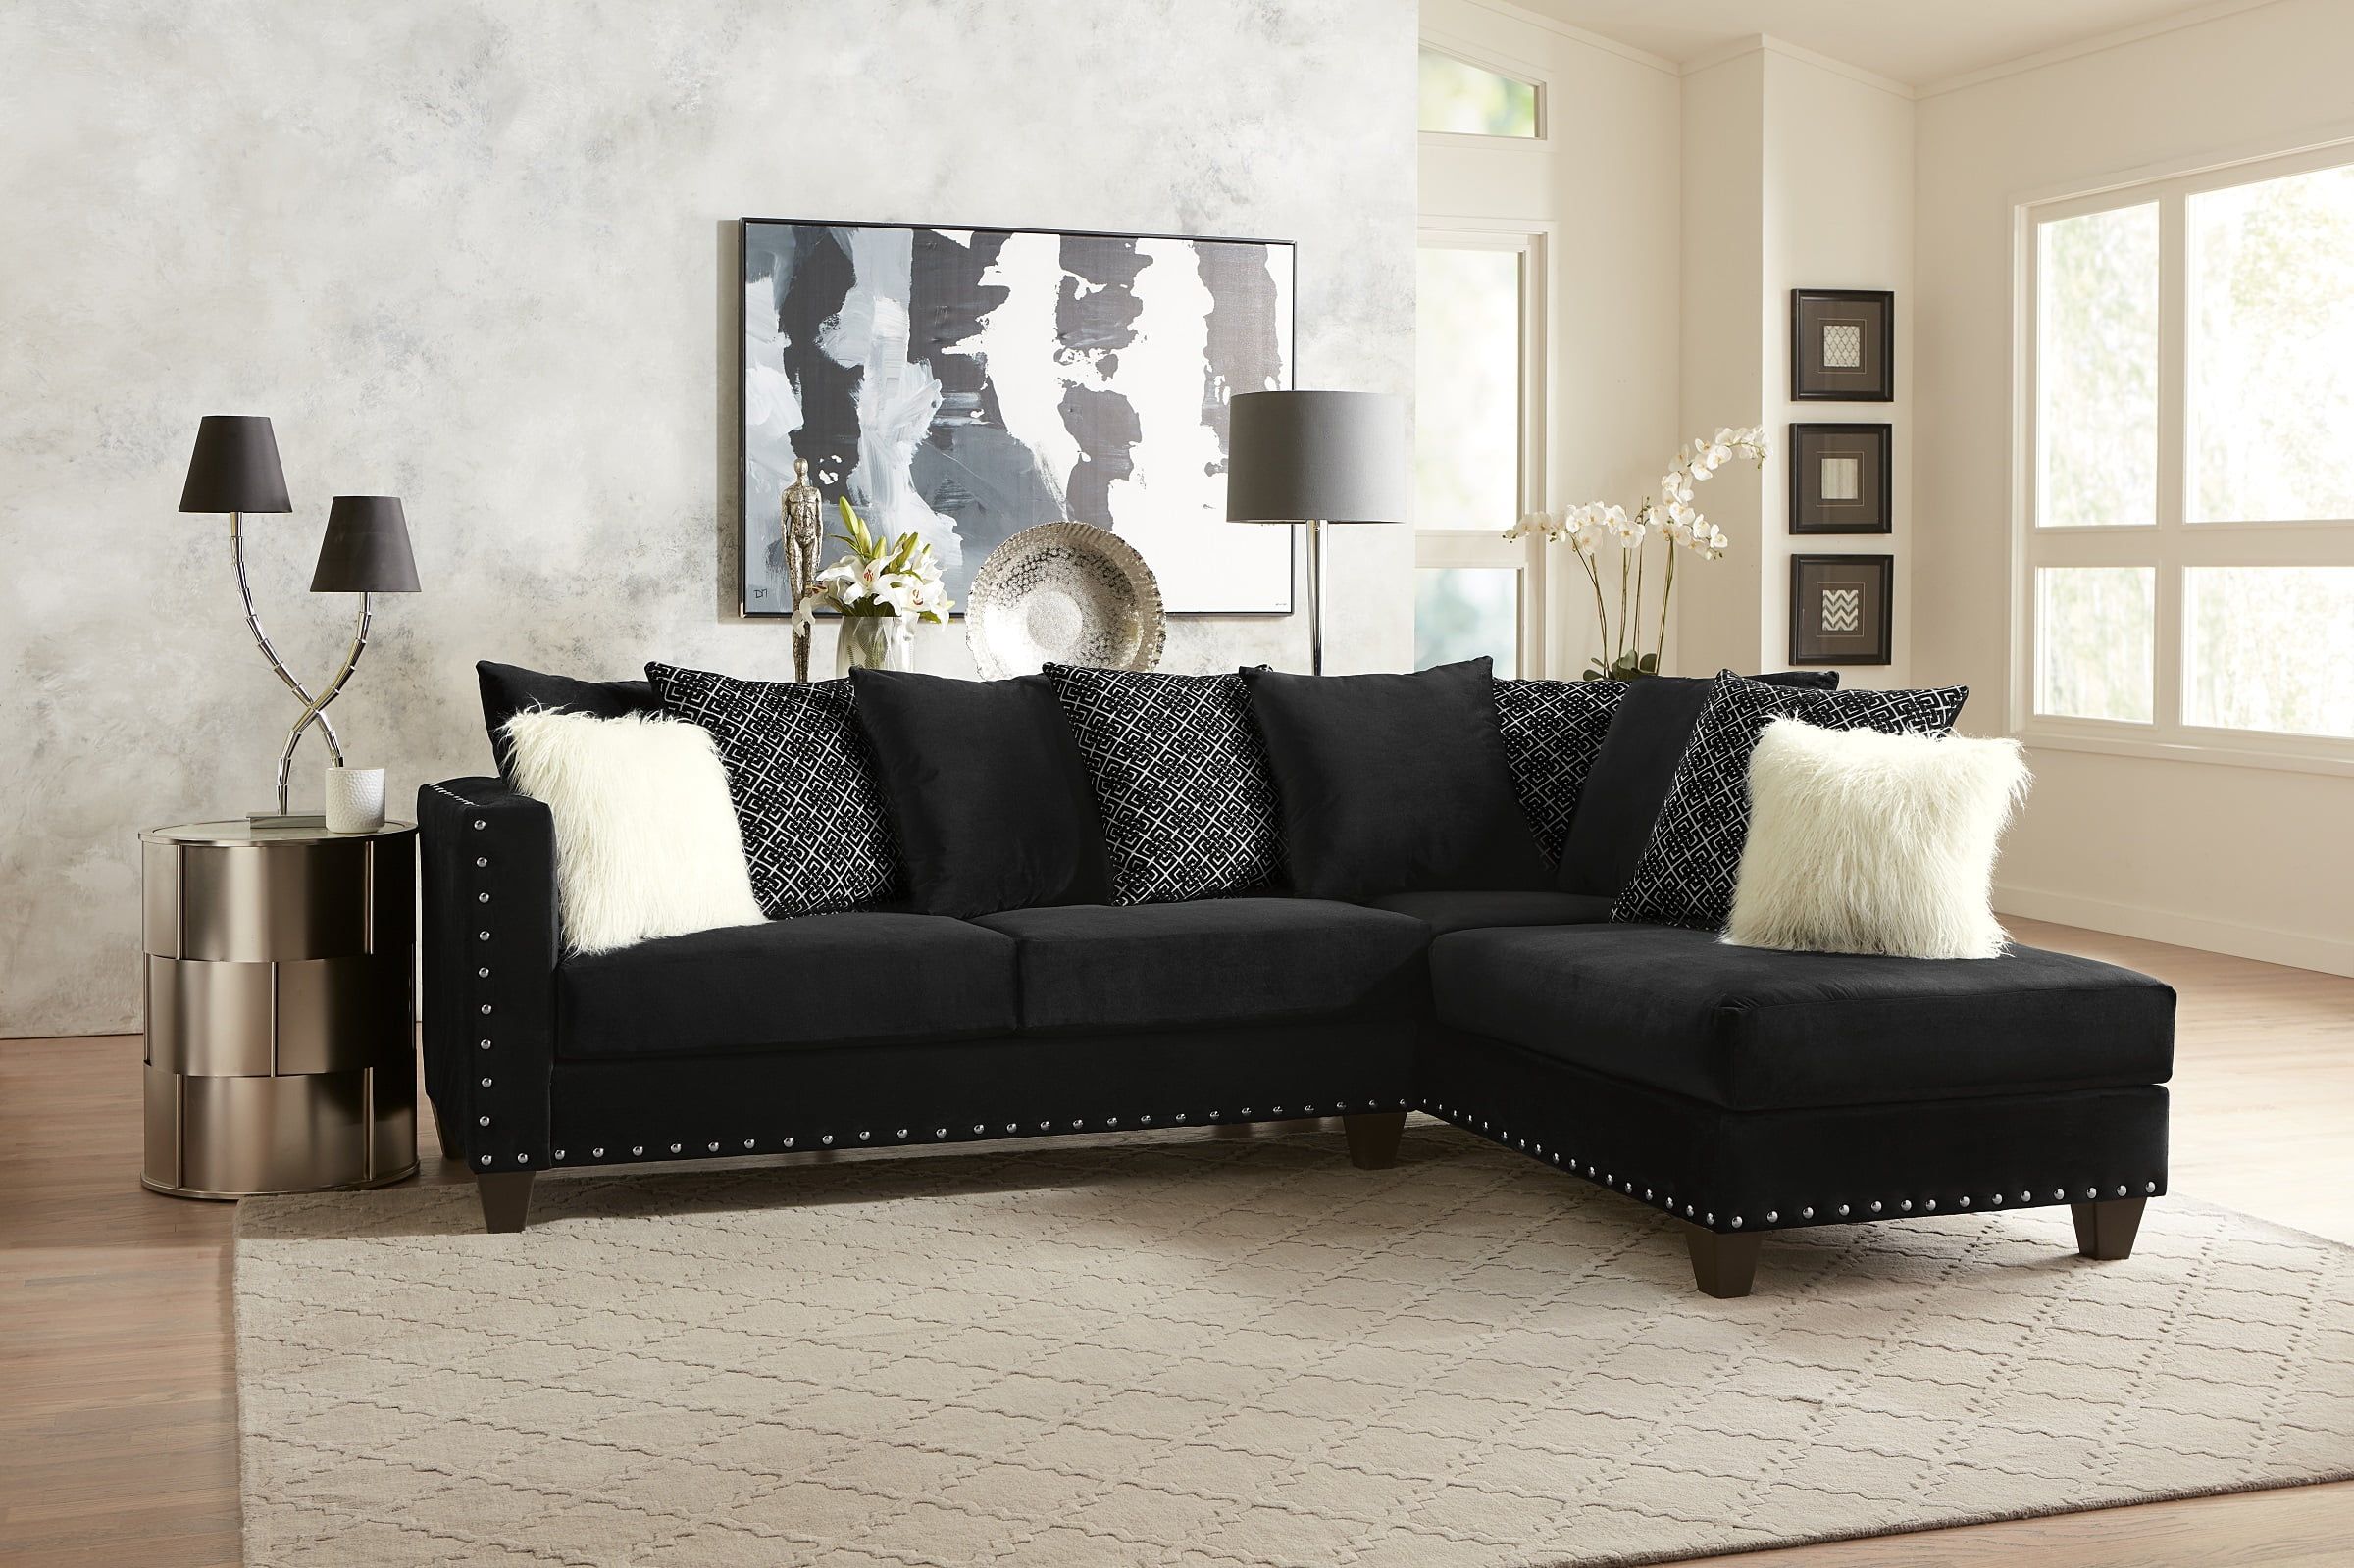 Living Room Modern Classic Black Fabric Sectional Sofa 2pc Set Cushion Pertaining To Traditional Black Fabric Sofas (Gallery 14 of 21)